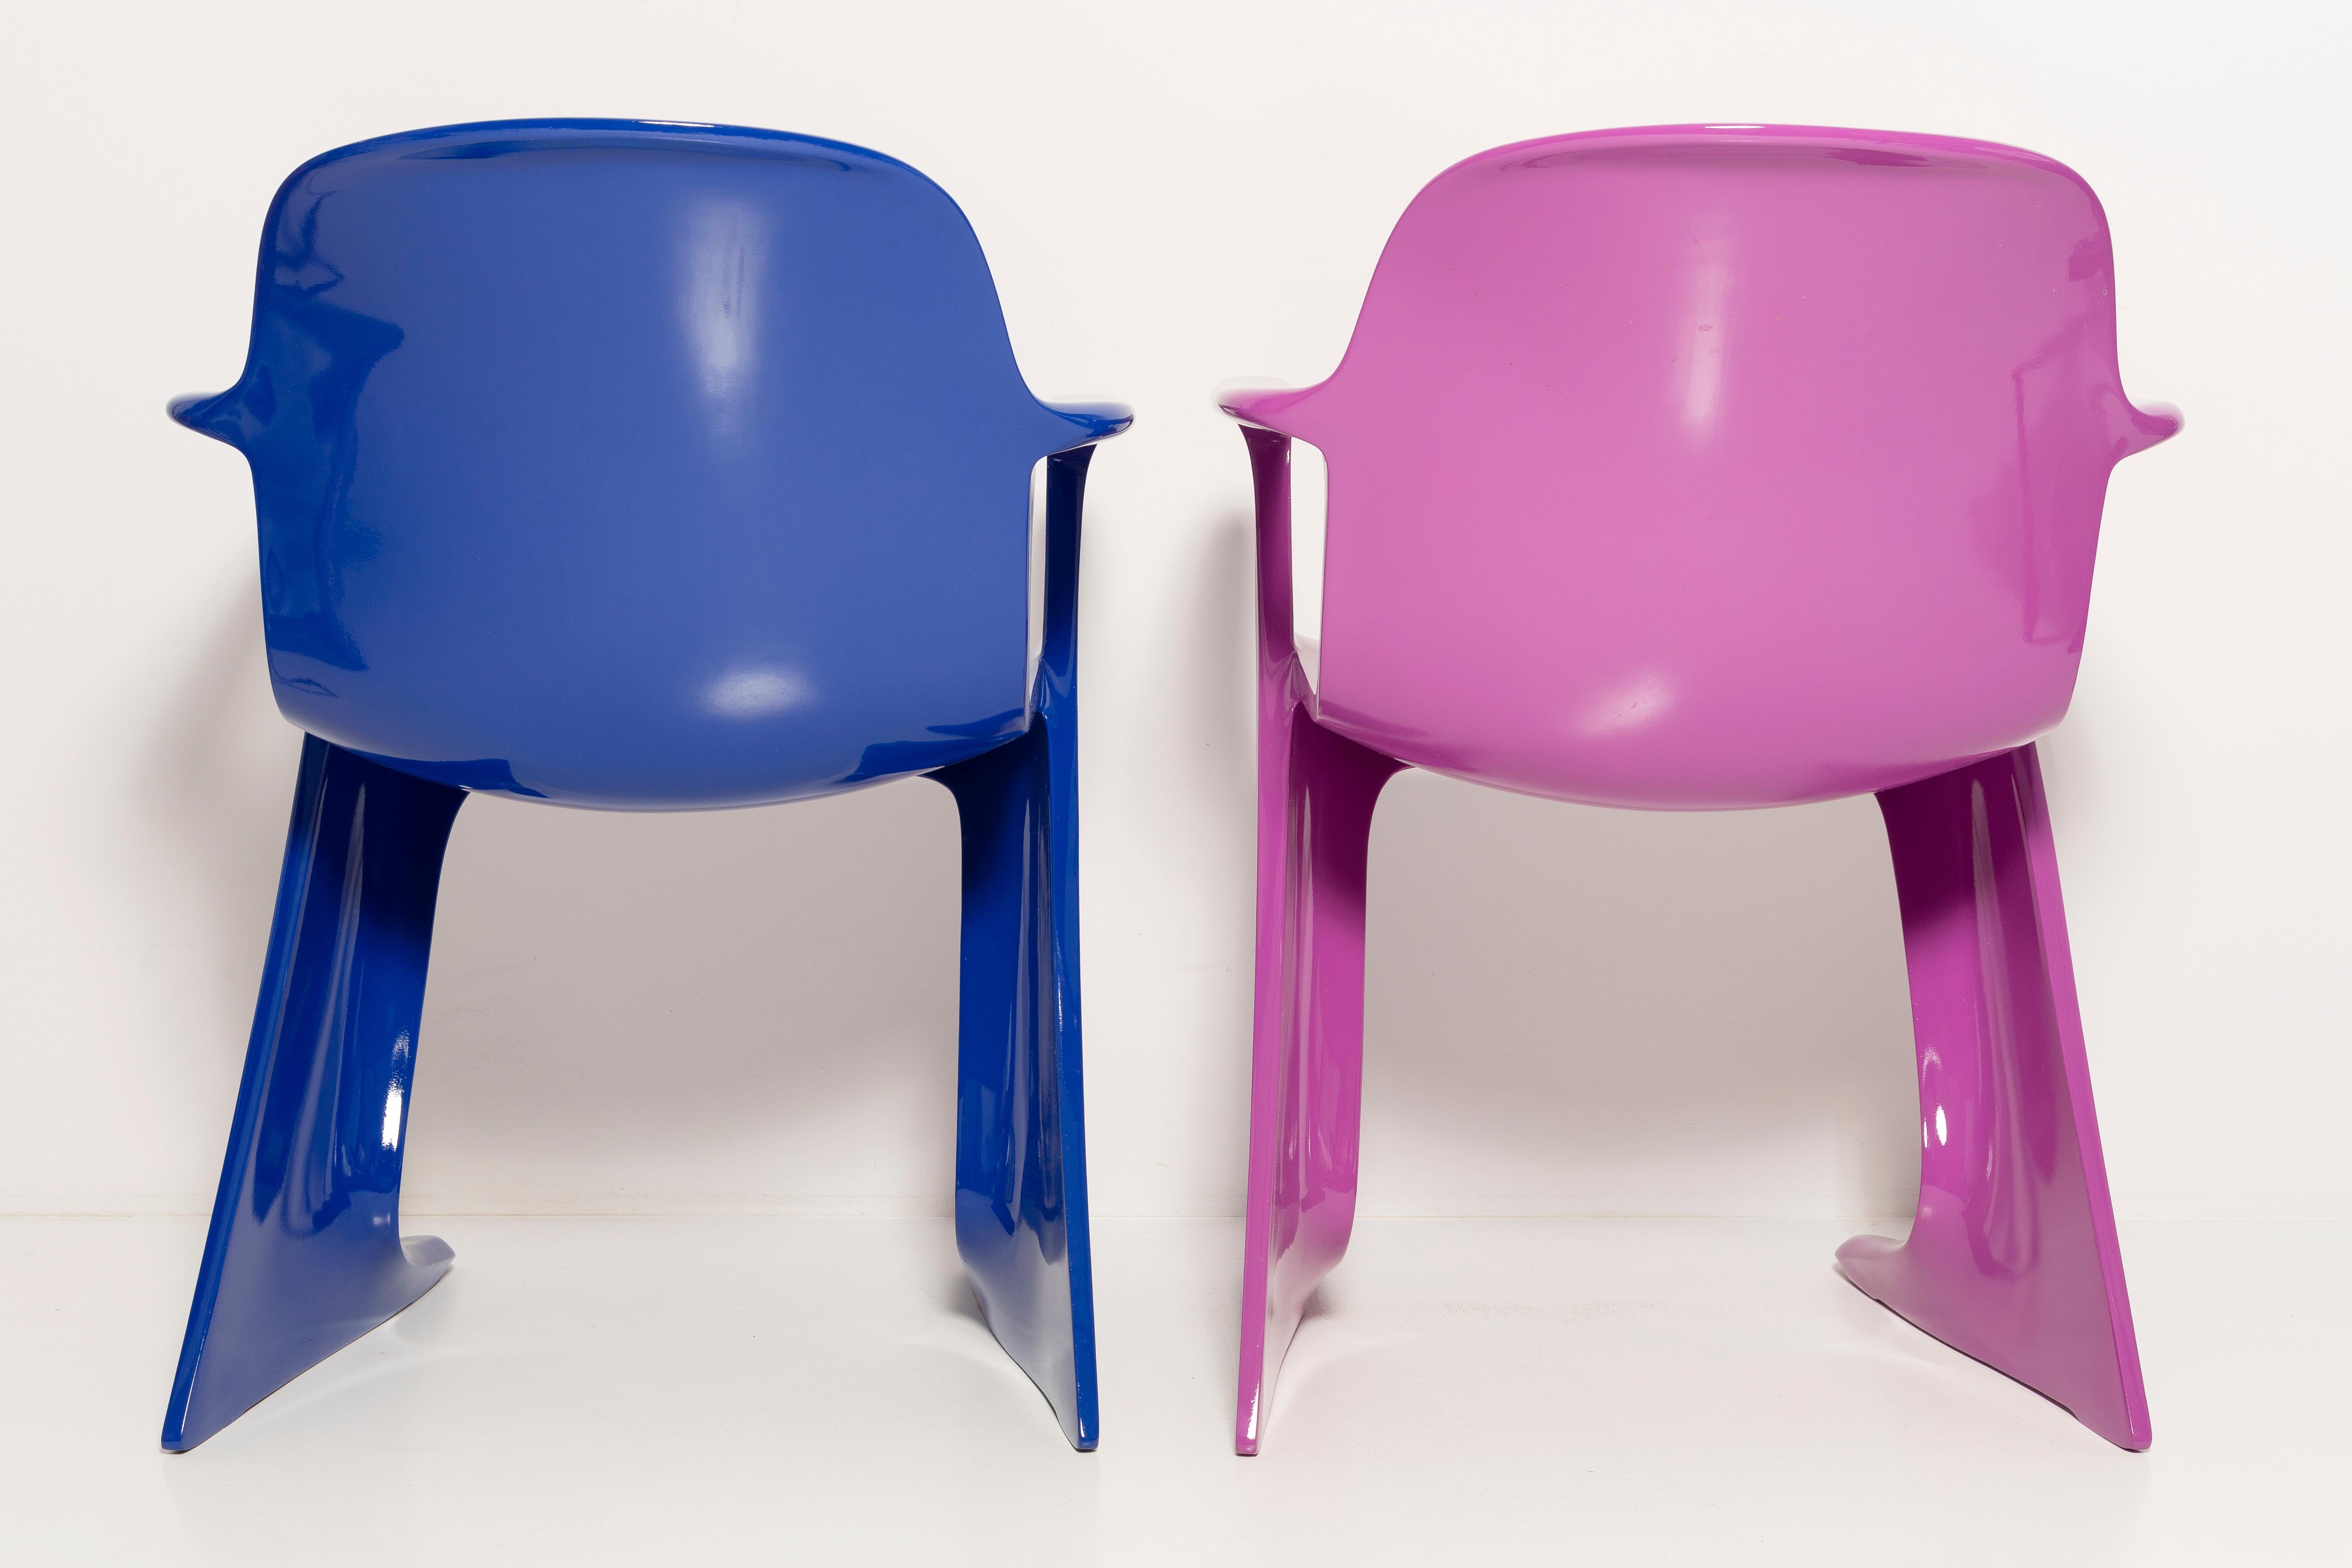 Two Mid-Century Purple and Blue Kangaroo Chairs, Ernst Moeckl, Germany, 1968 For Sale 2